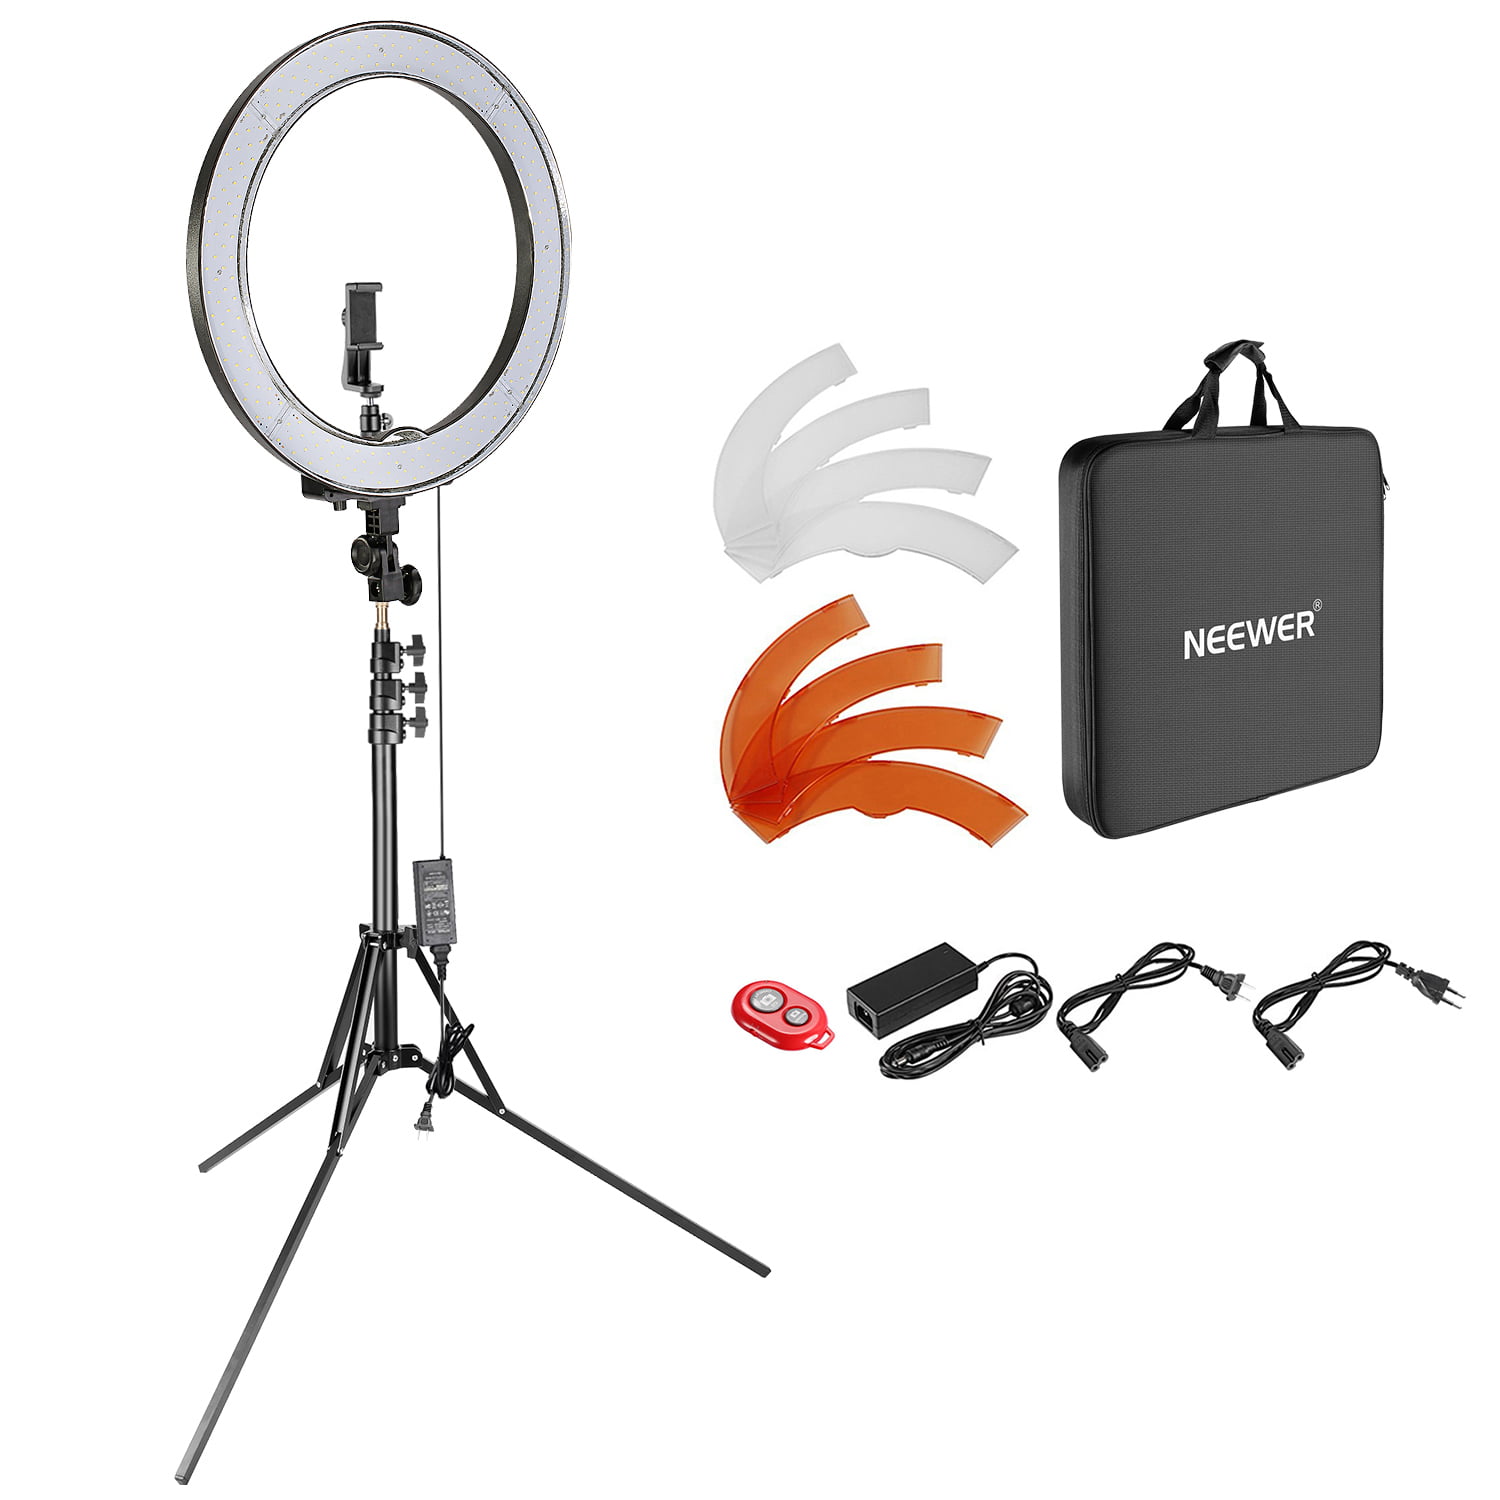 Neewer Advanced 18-inch LED Ring Light Support Manual Touch